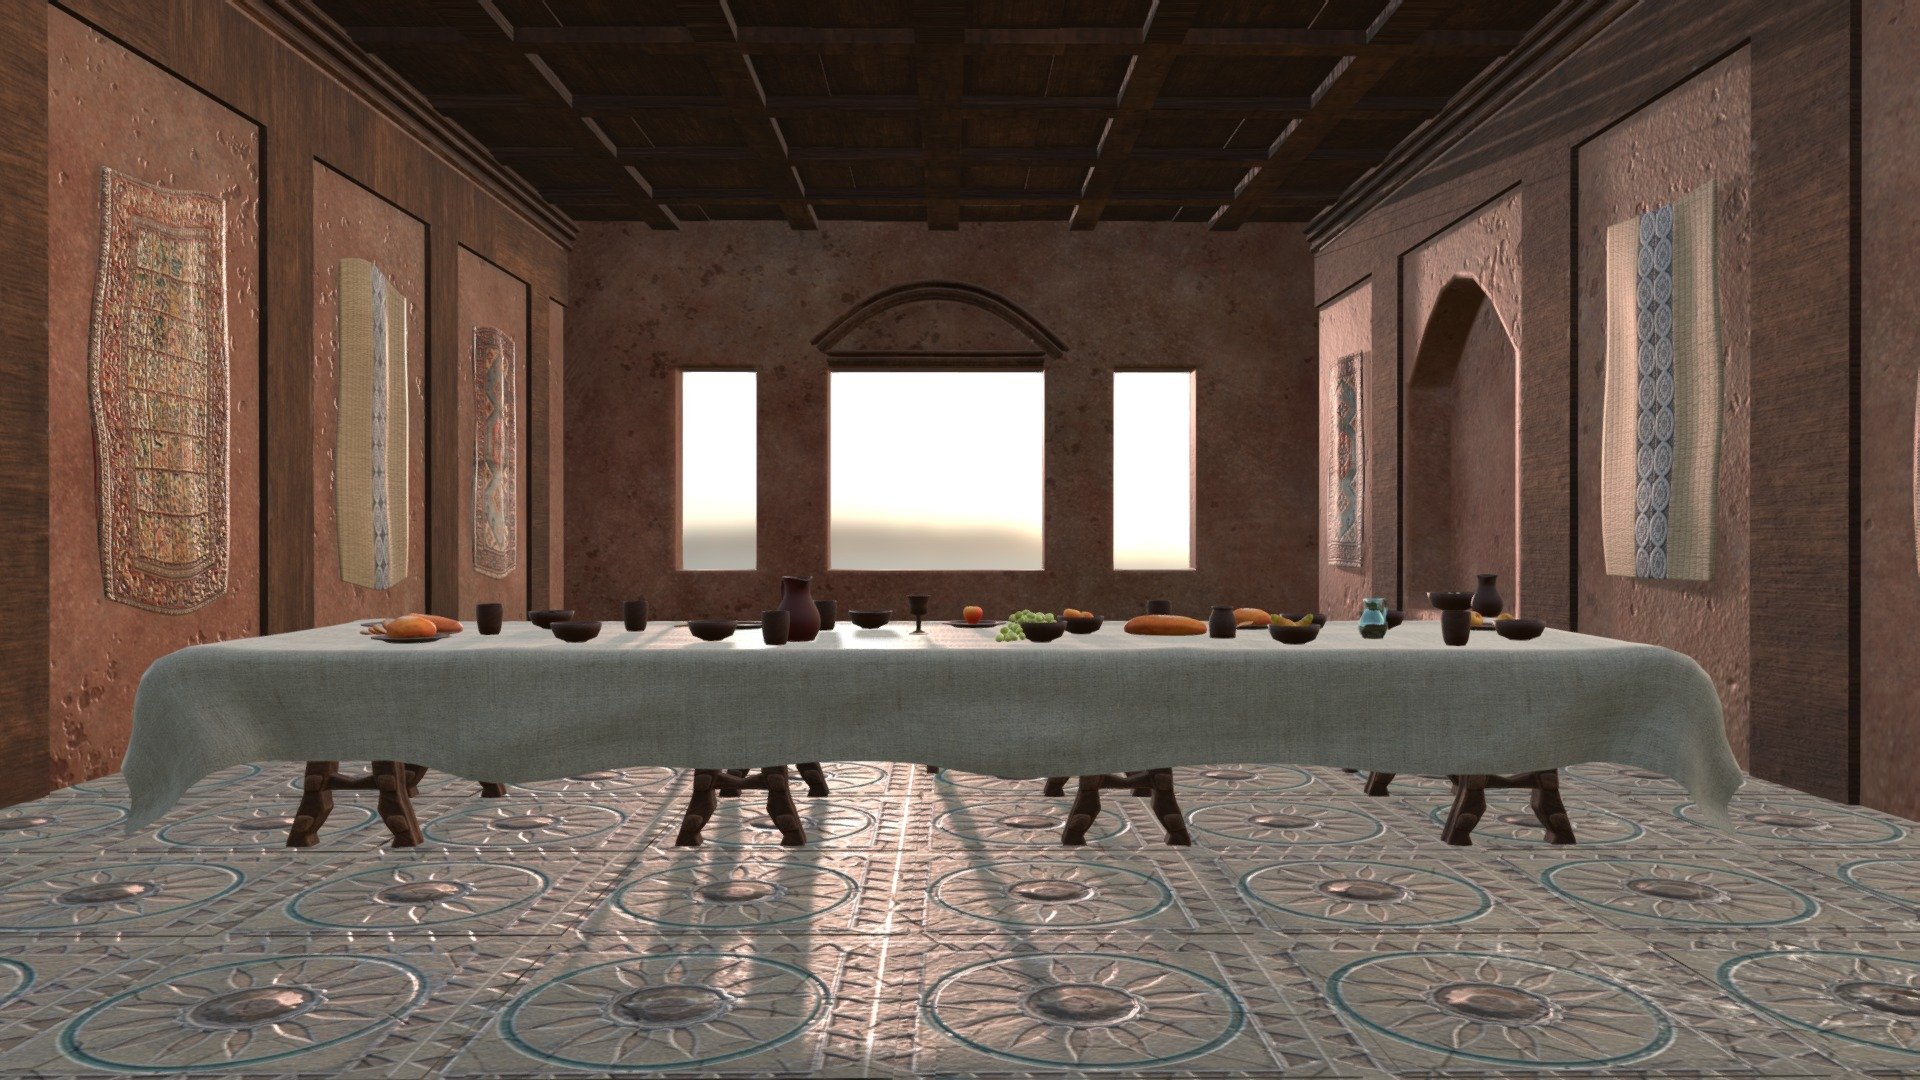 What did we find 15 minutes before the last Supper? The room and the space.
Maded in Blender and render cycles.
Material floor from Andreas Gebert : https://share.allegorithmic.com/libraries/505 - 15 minuts before Last Supper - Buy Royalty Free 3D model by Skaldy 3d model